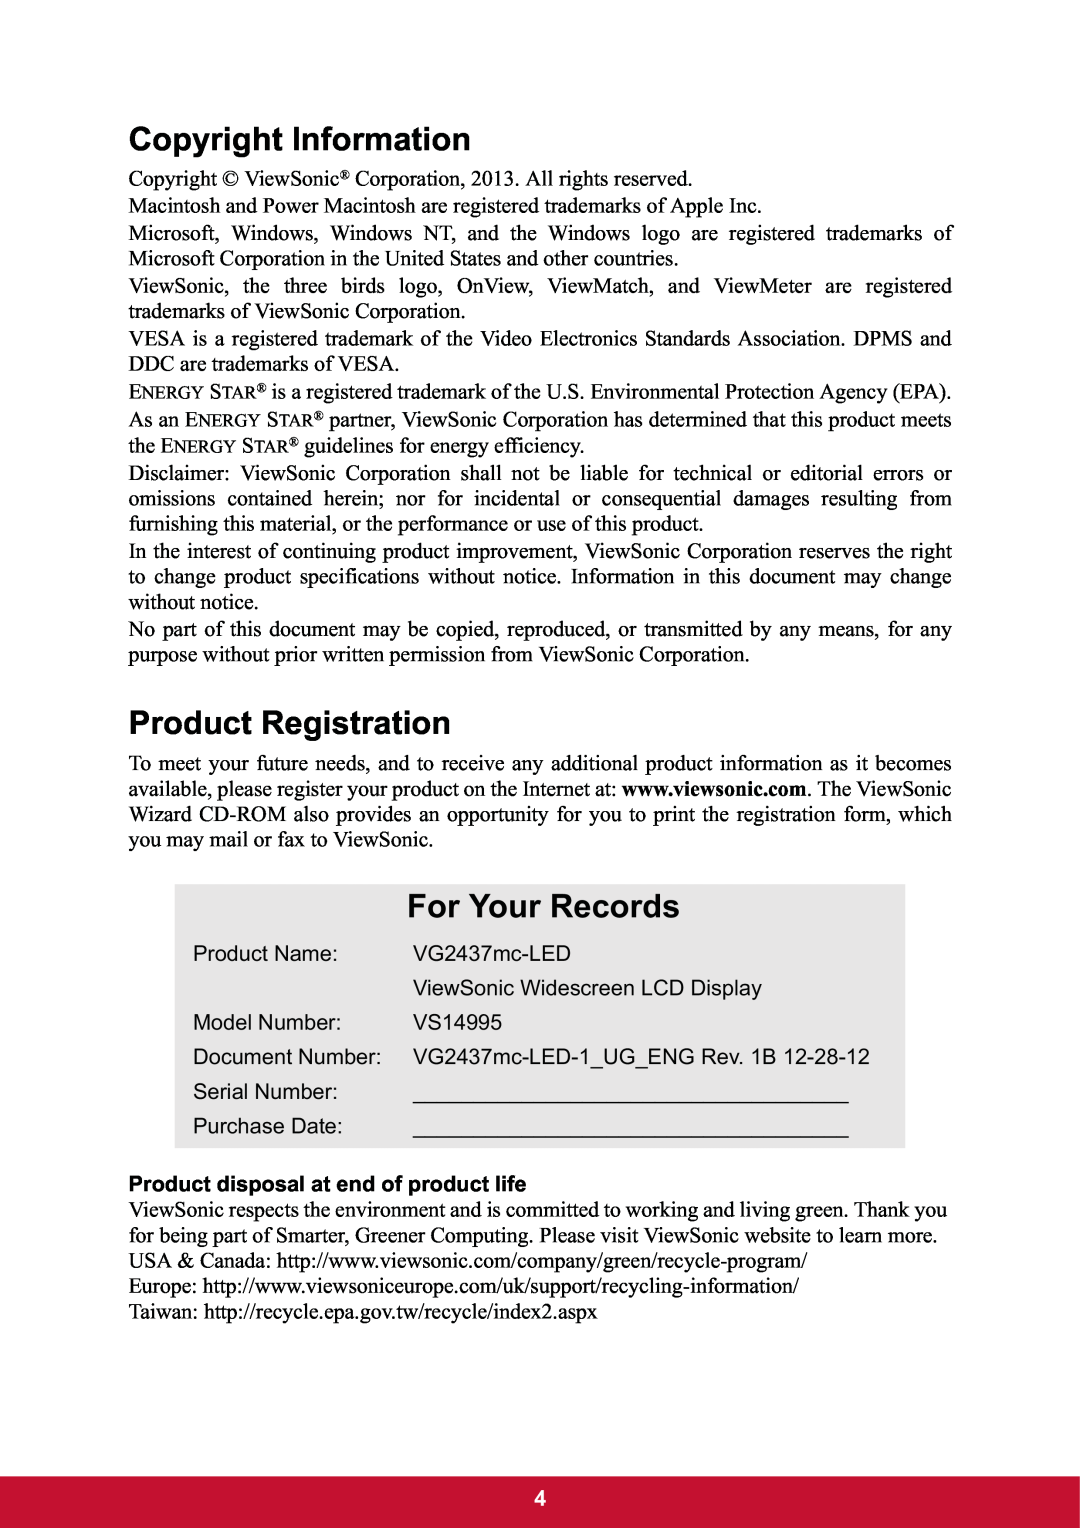 ViewSonic VG2437mc-LED warranty Copyright Information, Product Registration, For Your Records 